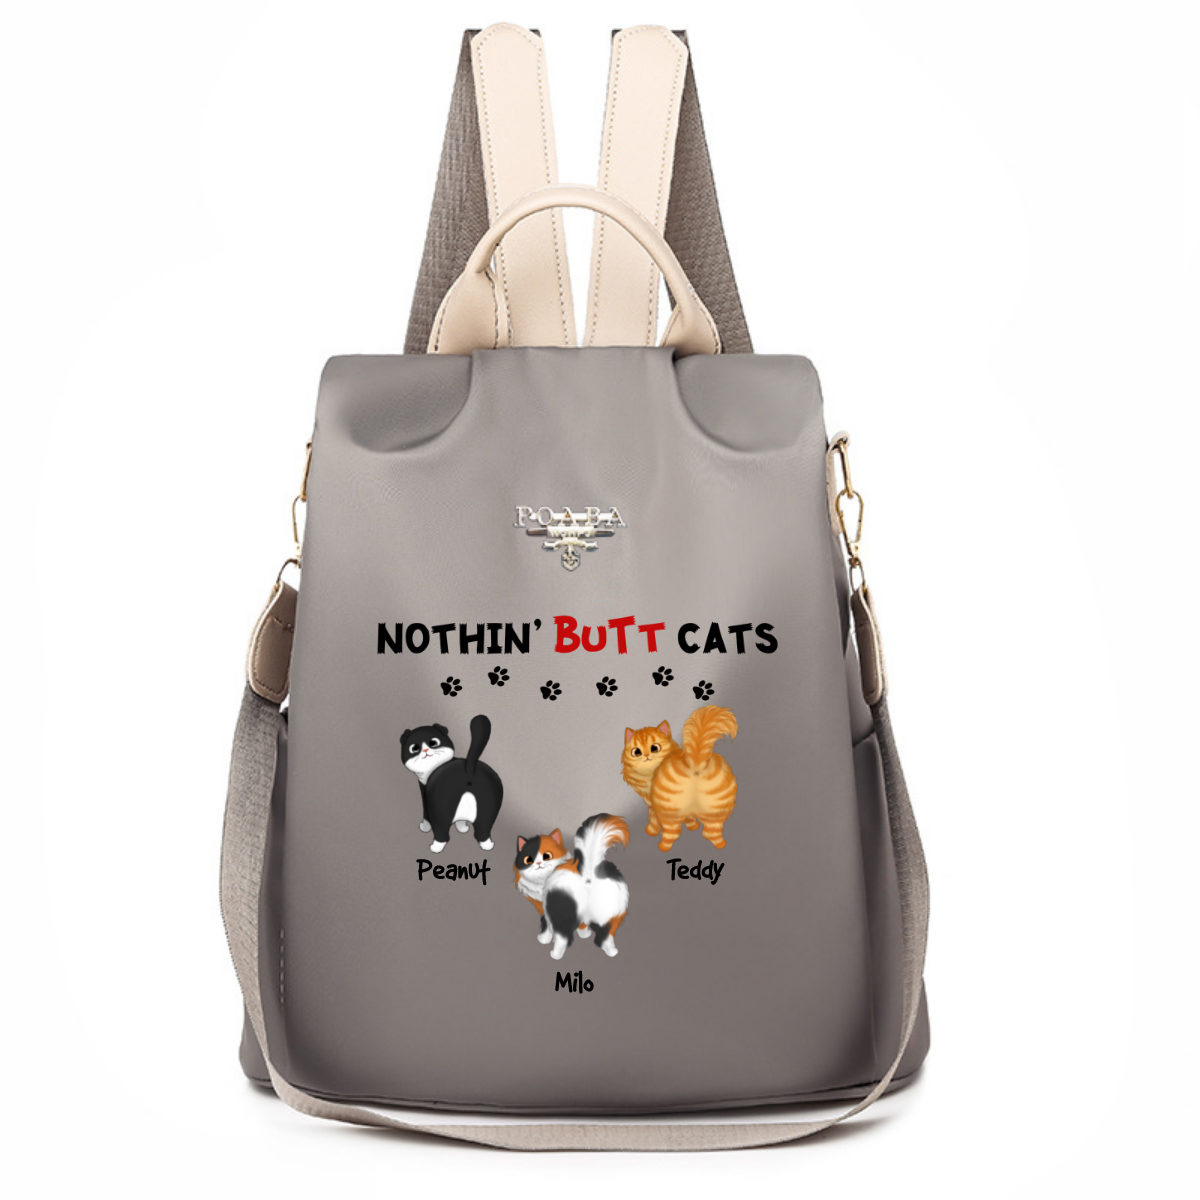 Nothing Butt Cats Fluffy Cat Personalized Backpack